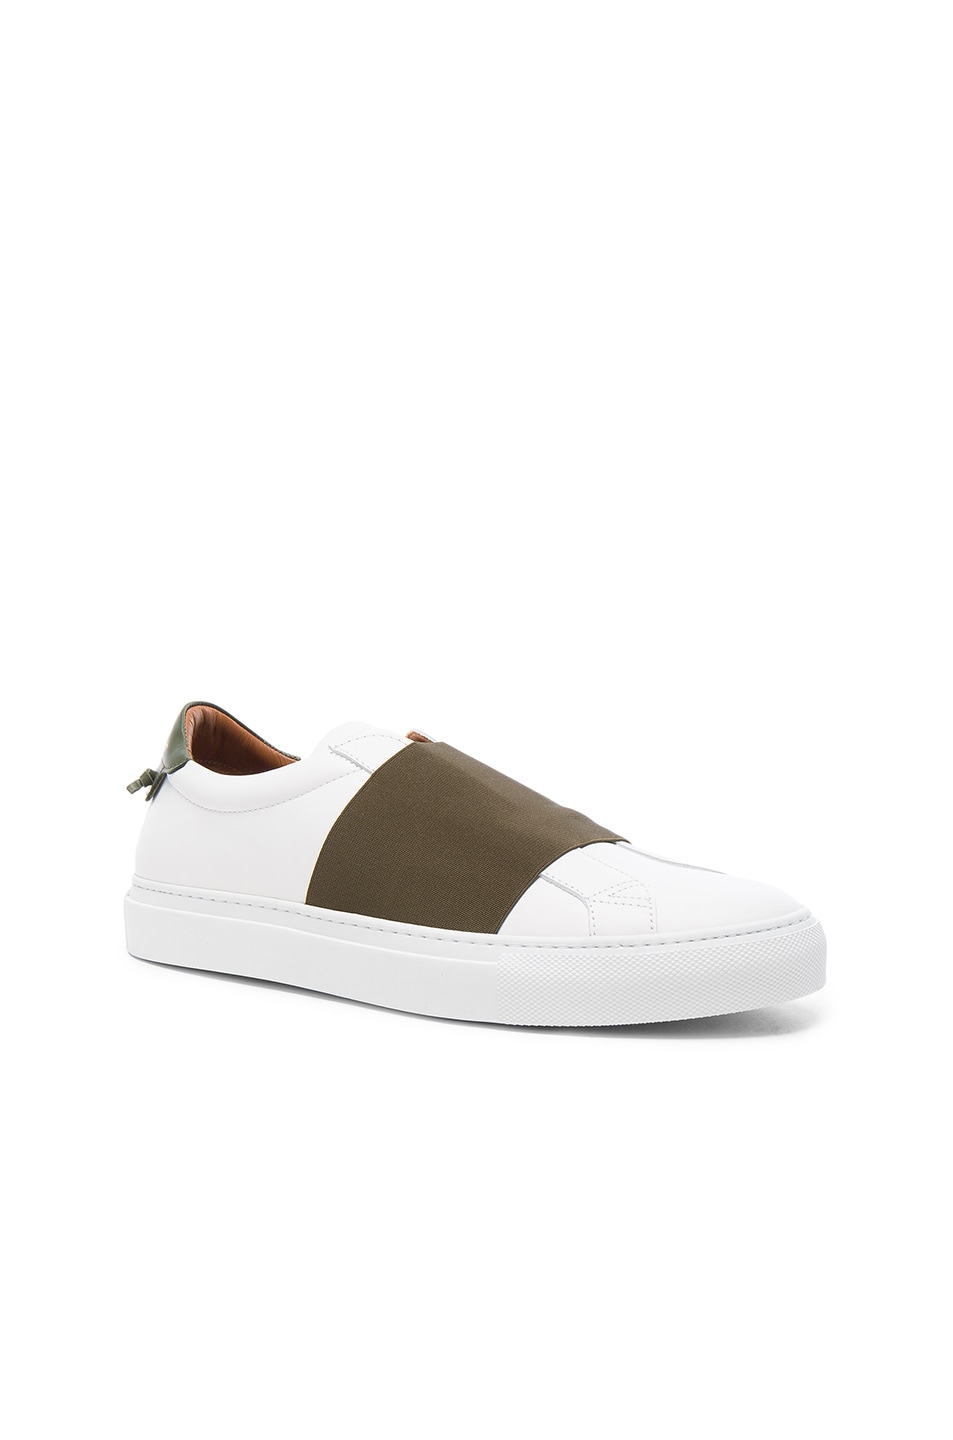 Image 1 of Givenchy Leather Skate Elastic Sneakers in White & Khaki